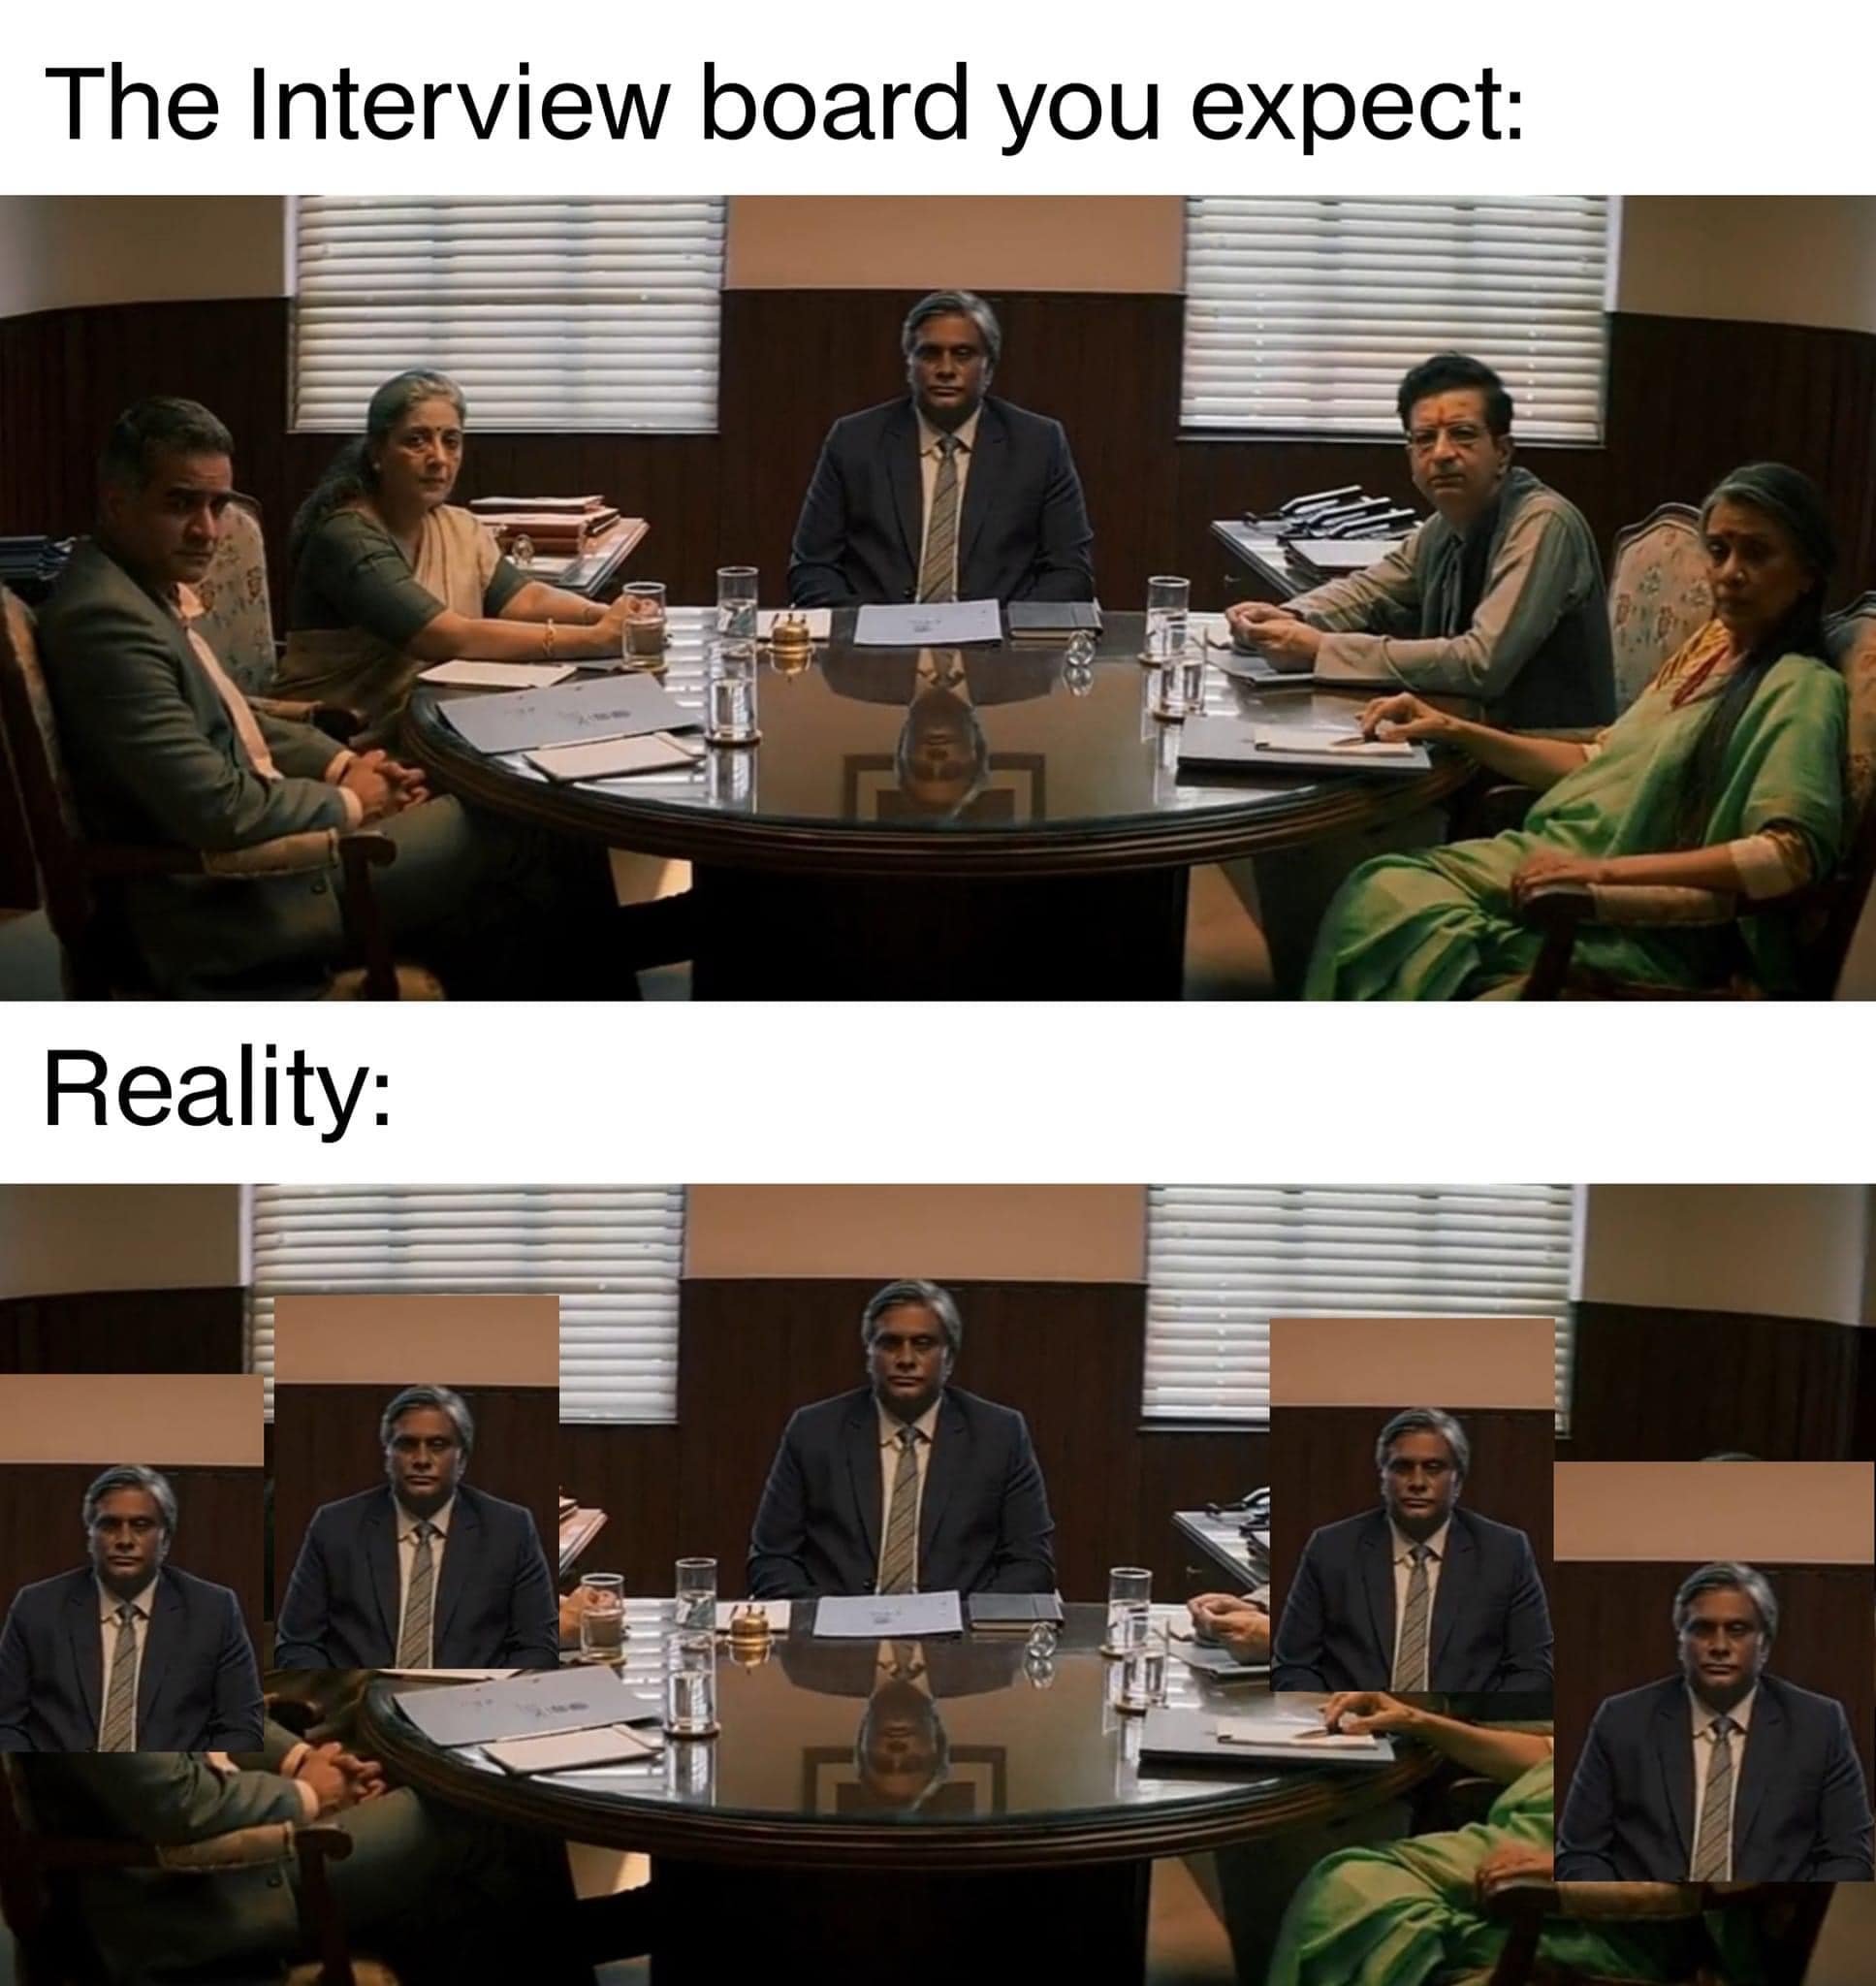 The interview board you expect